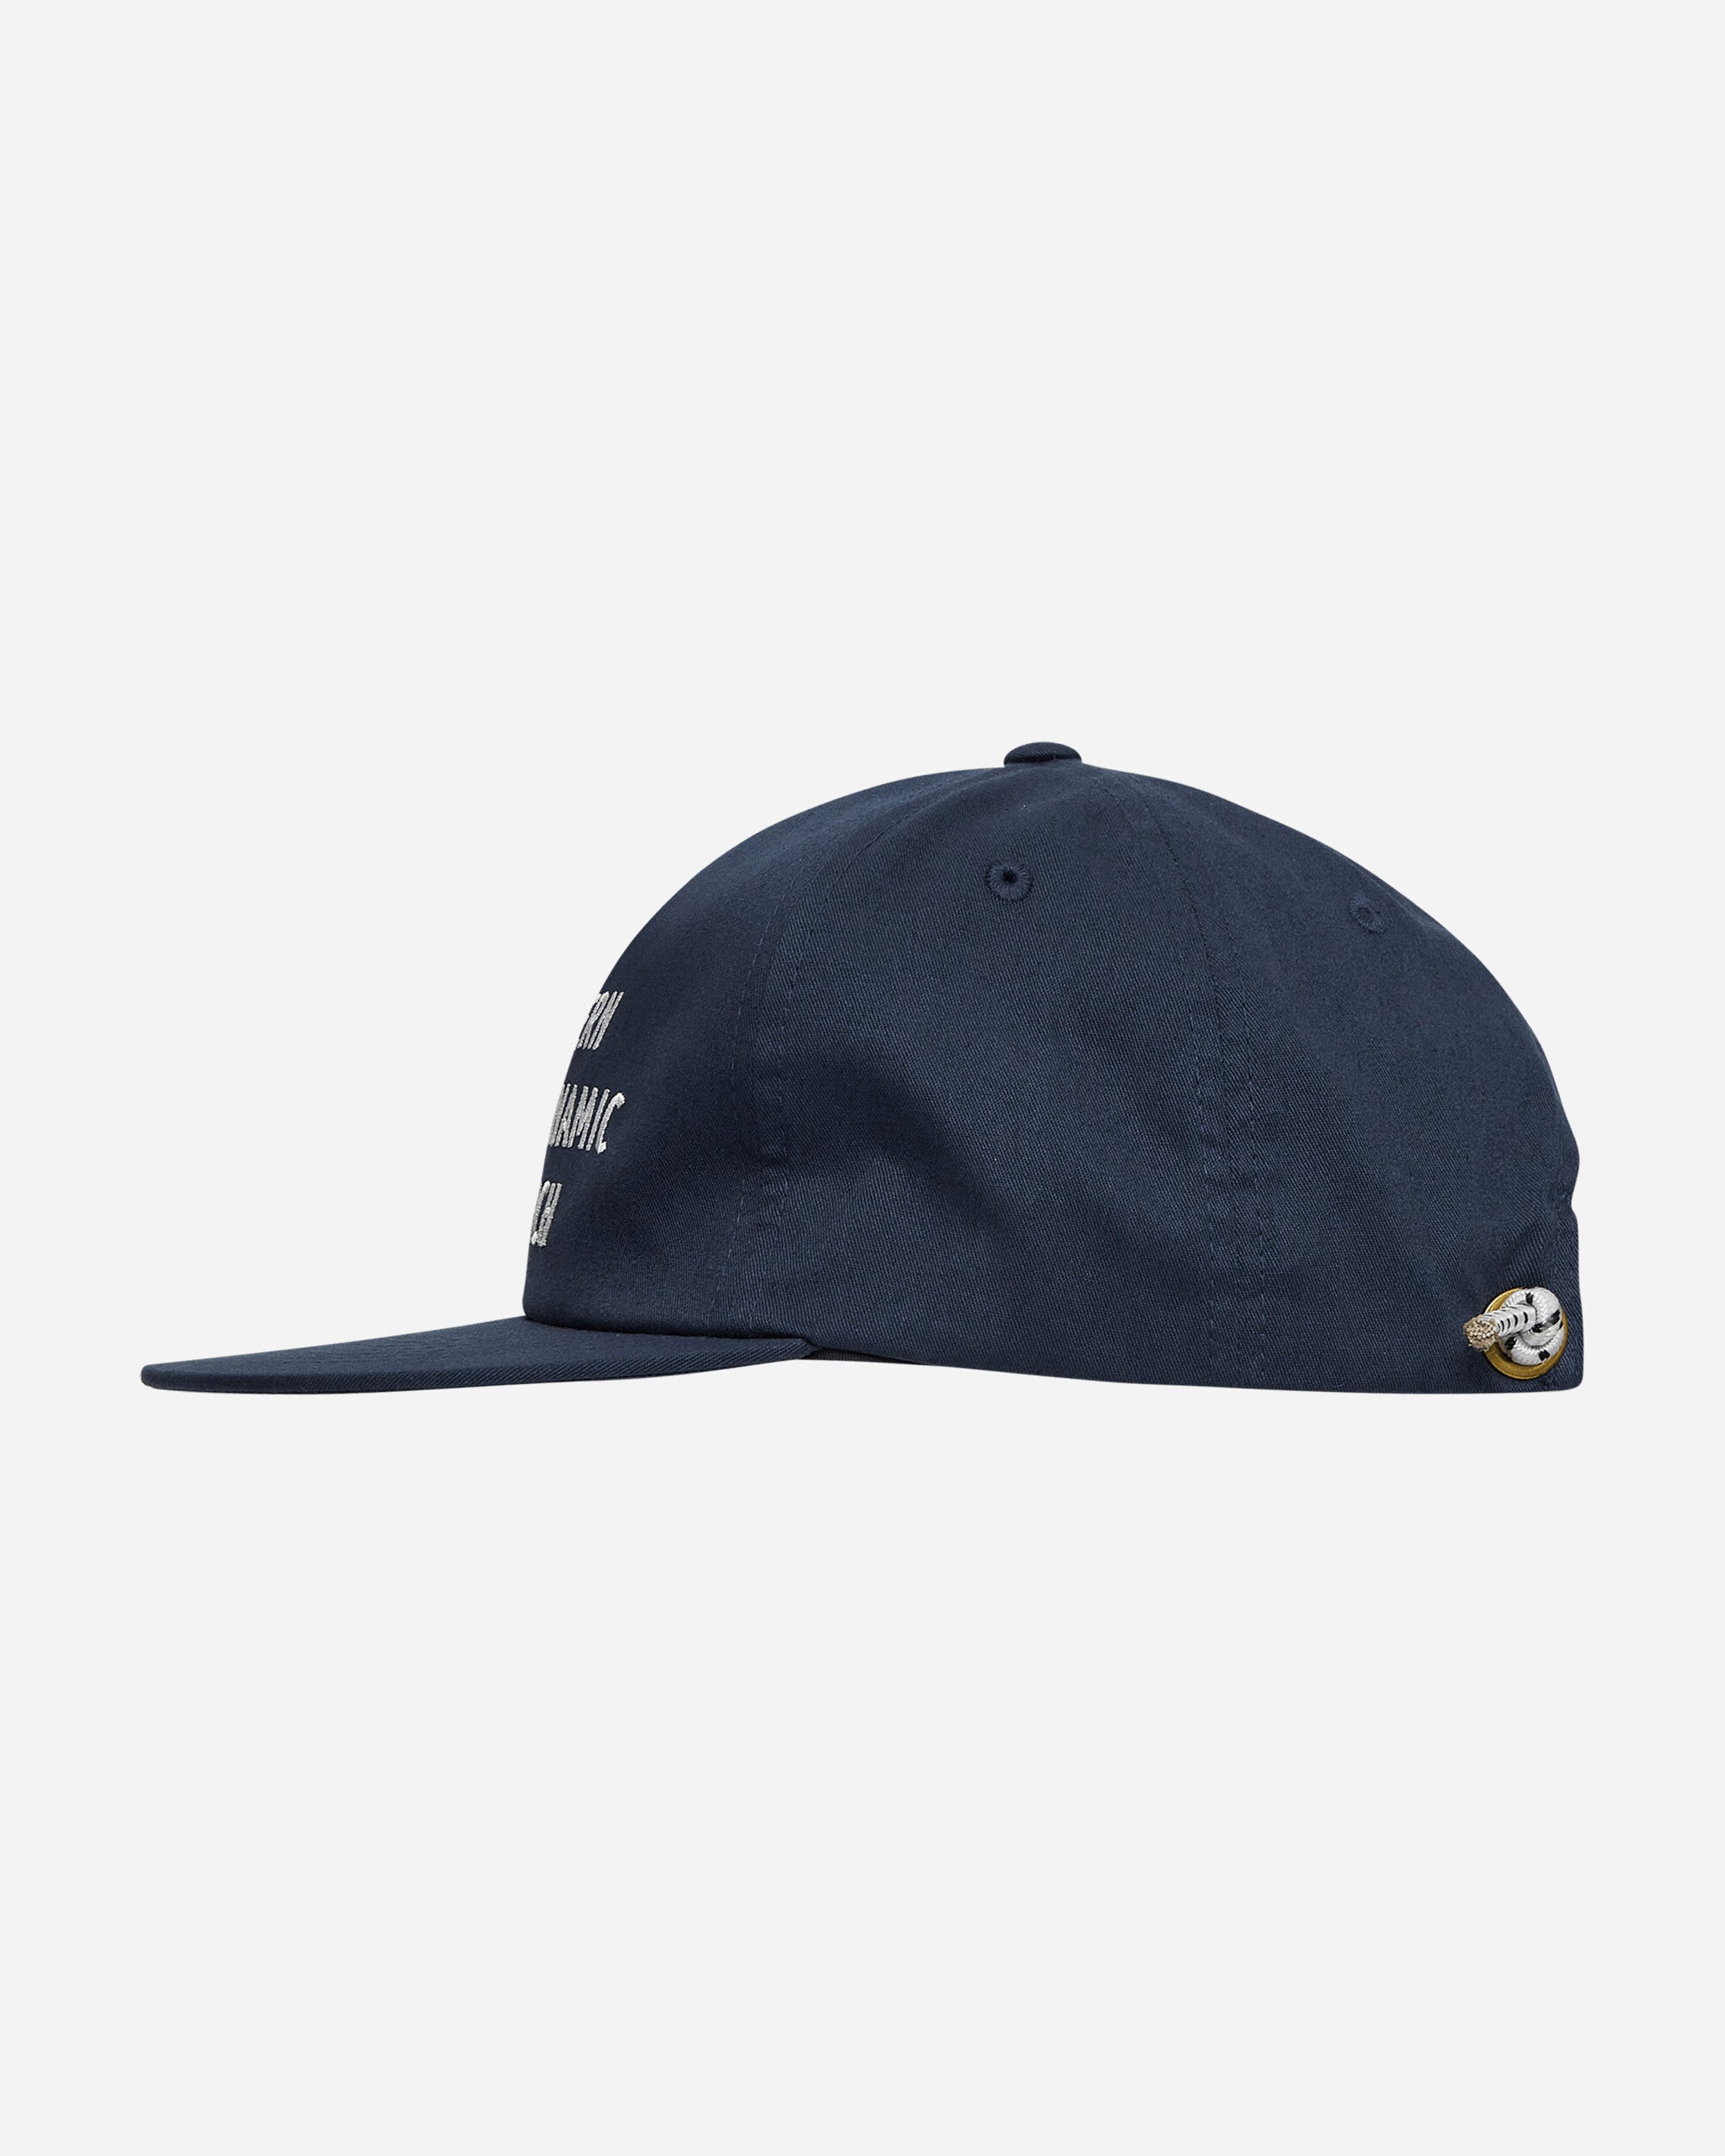 Promotional Hat Navy